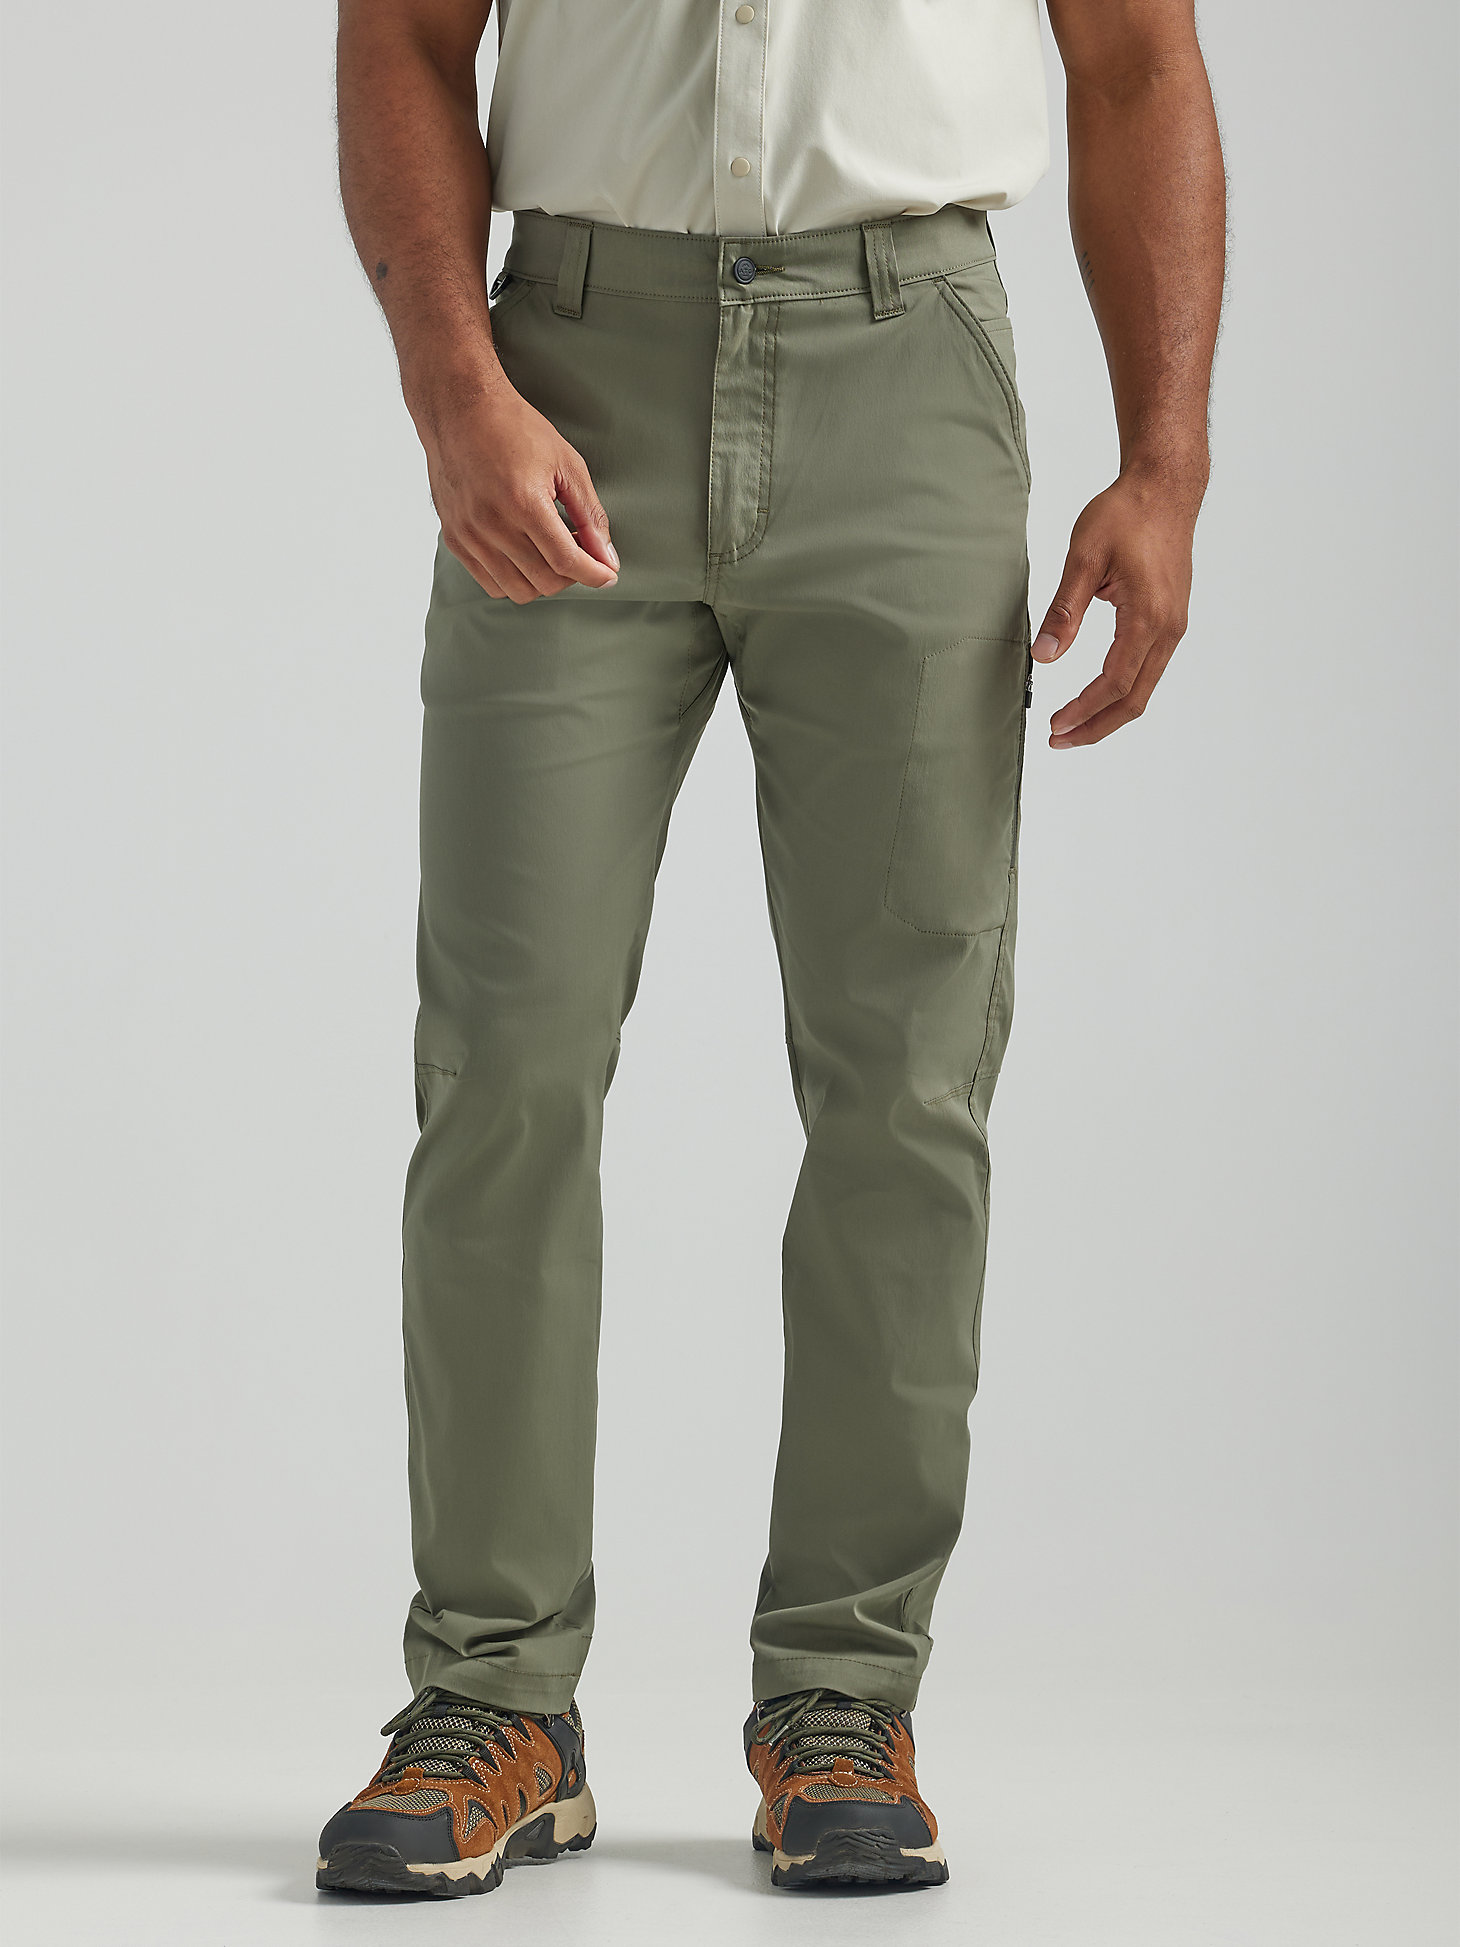 Sustainable Utility Pant in Dusty Olive main view